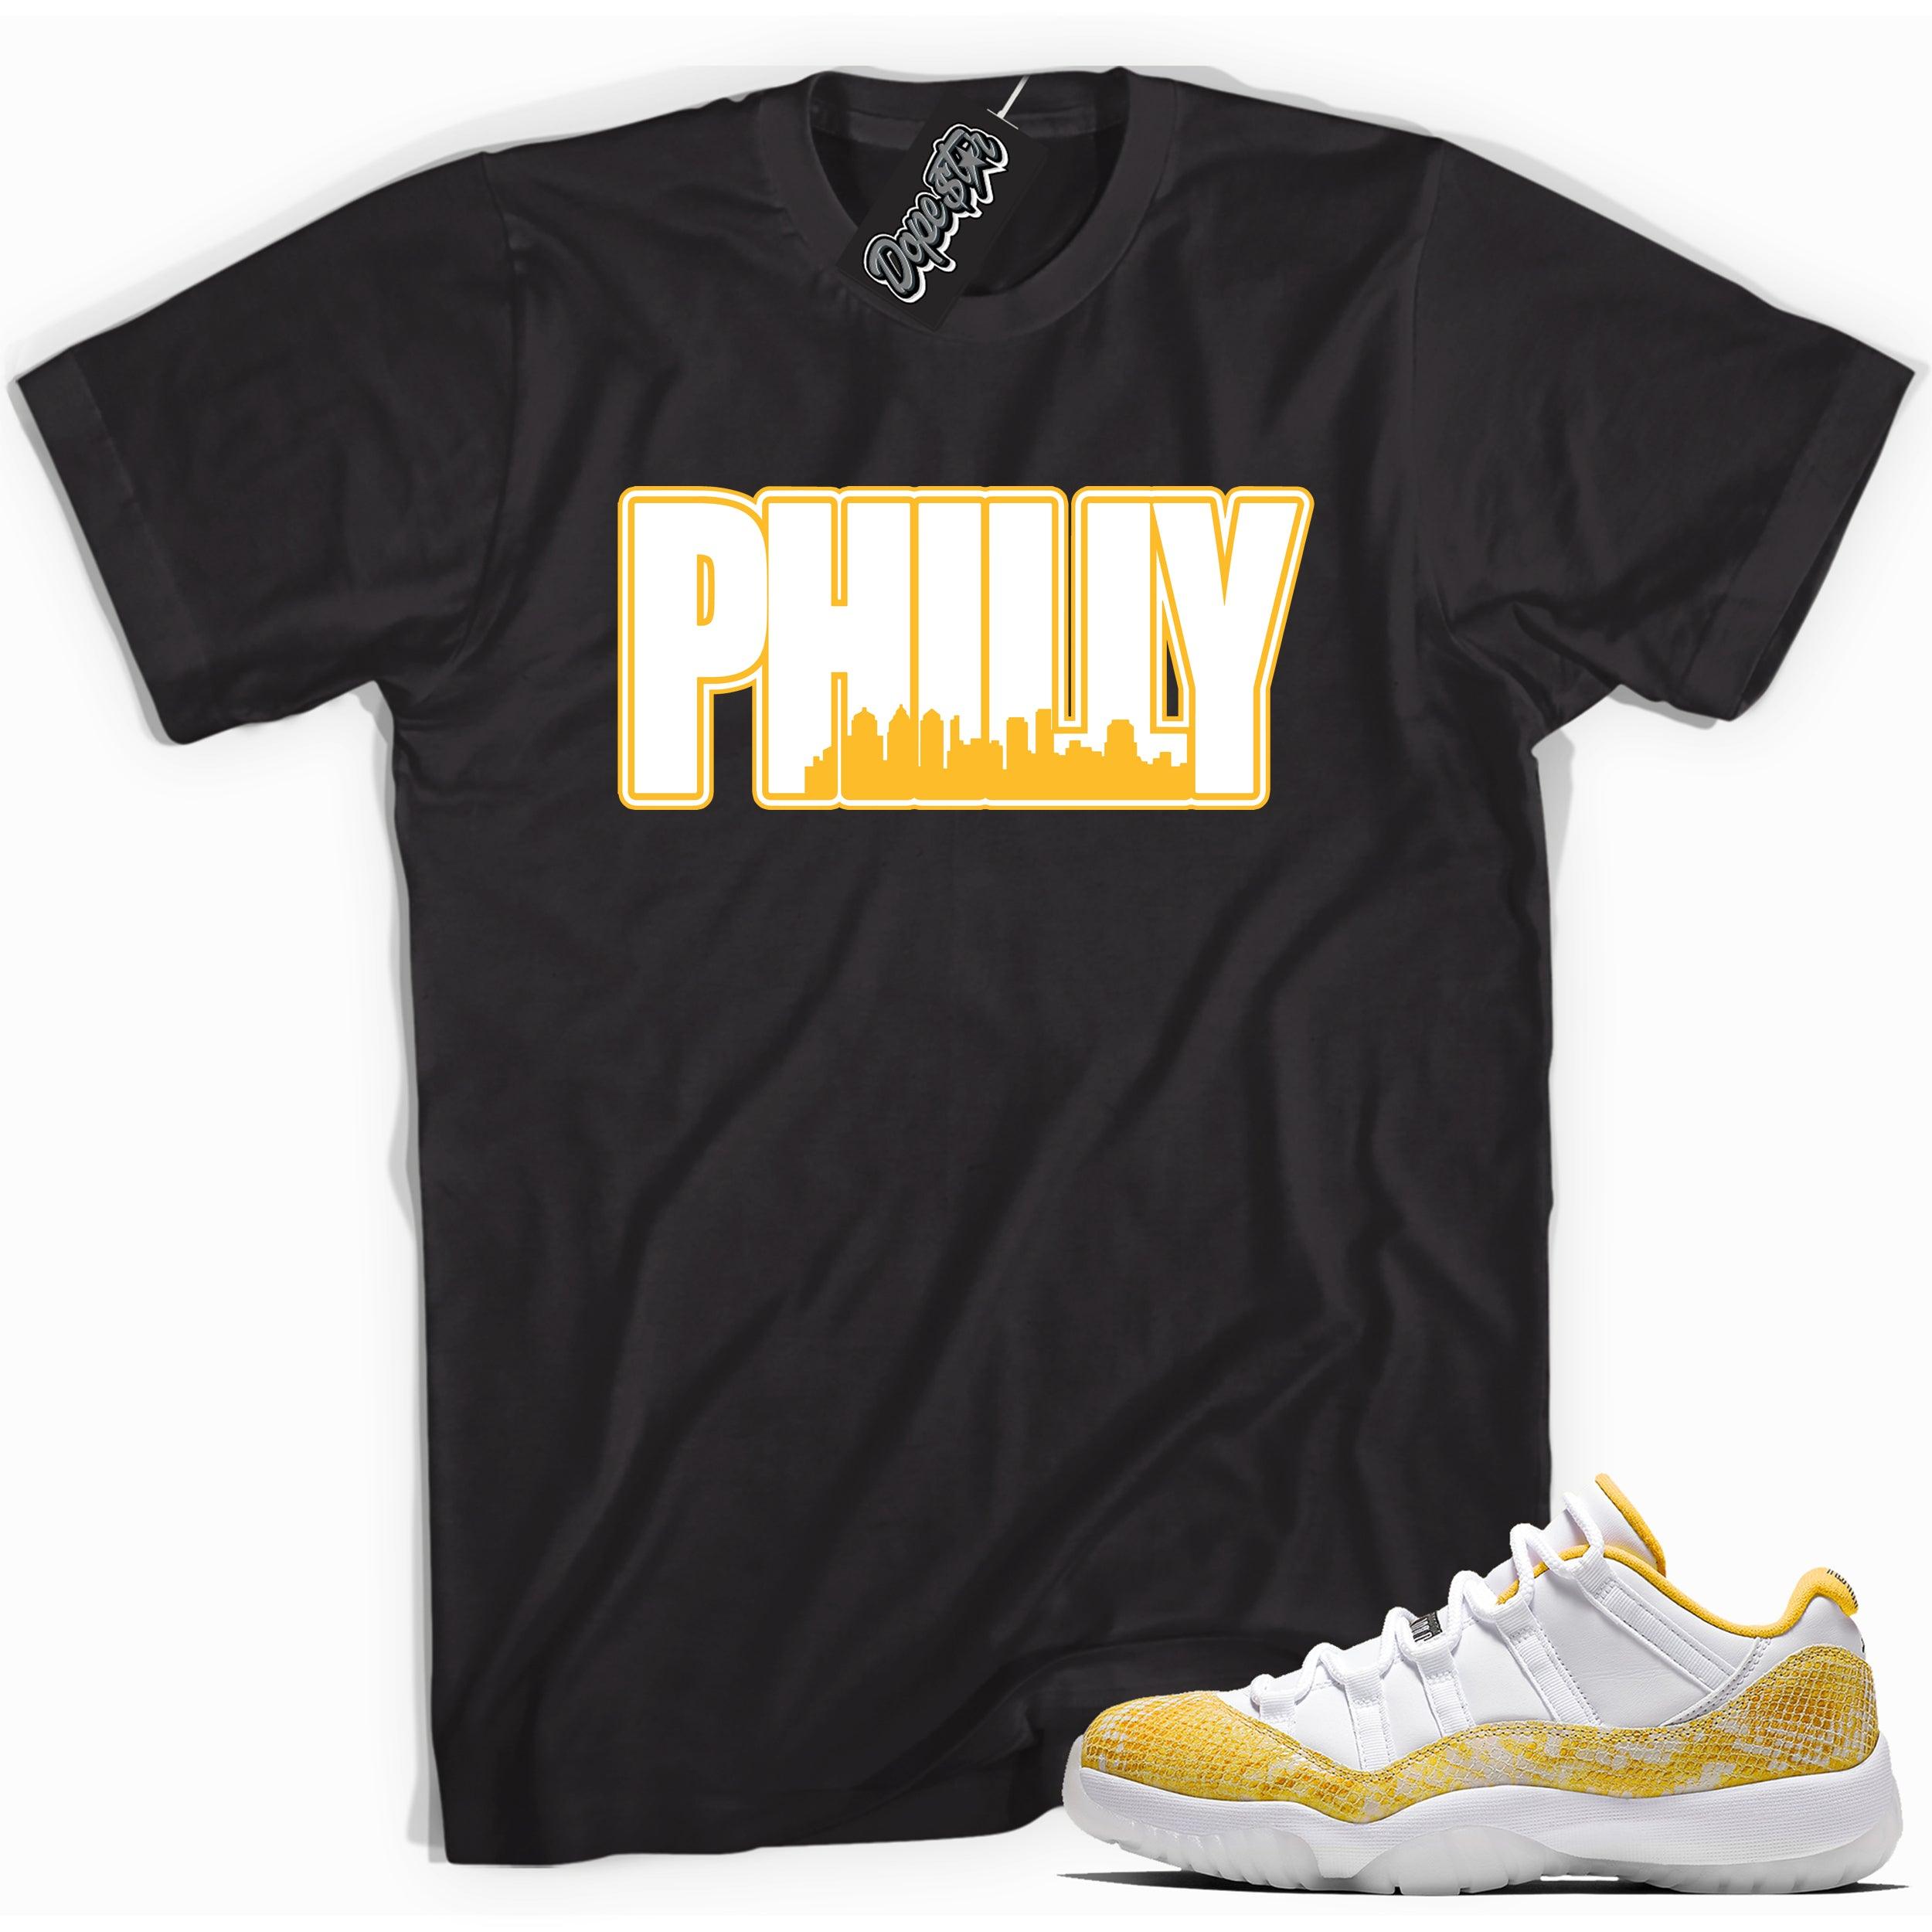 Cool black graphic tee with 'philly' print, that perfectly matches  Air Jordan 11 Retro Low Yellow Snakeskin sneakers